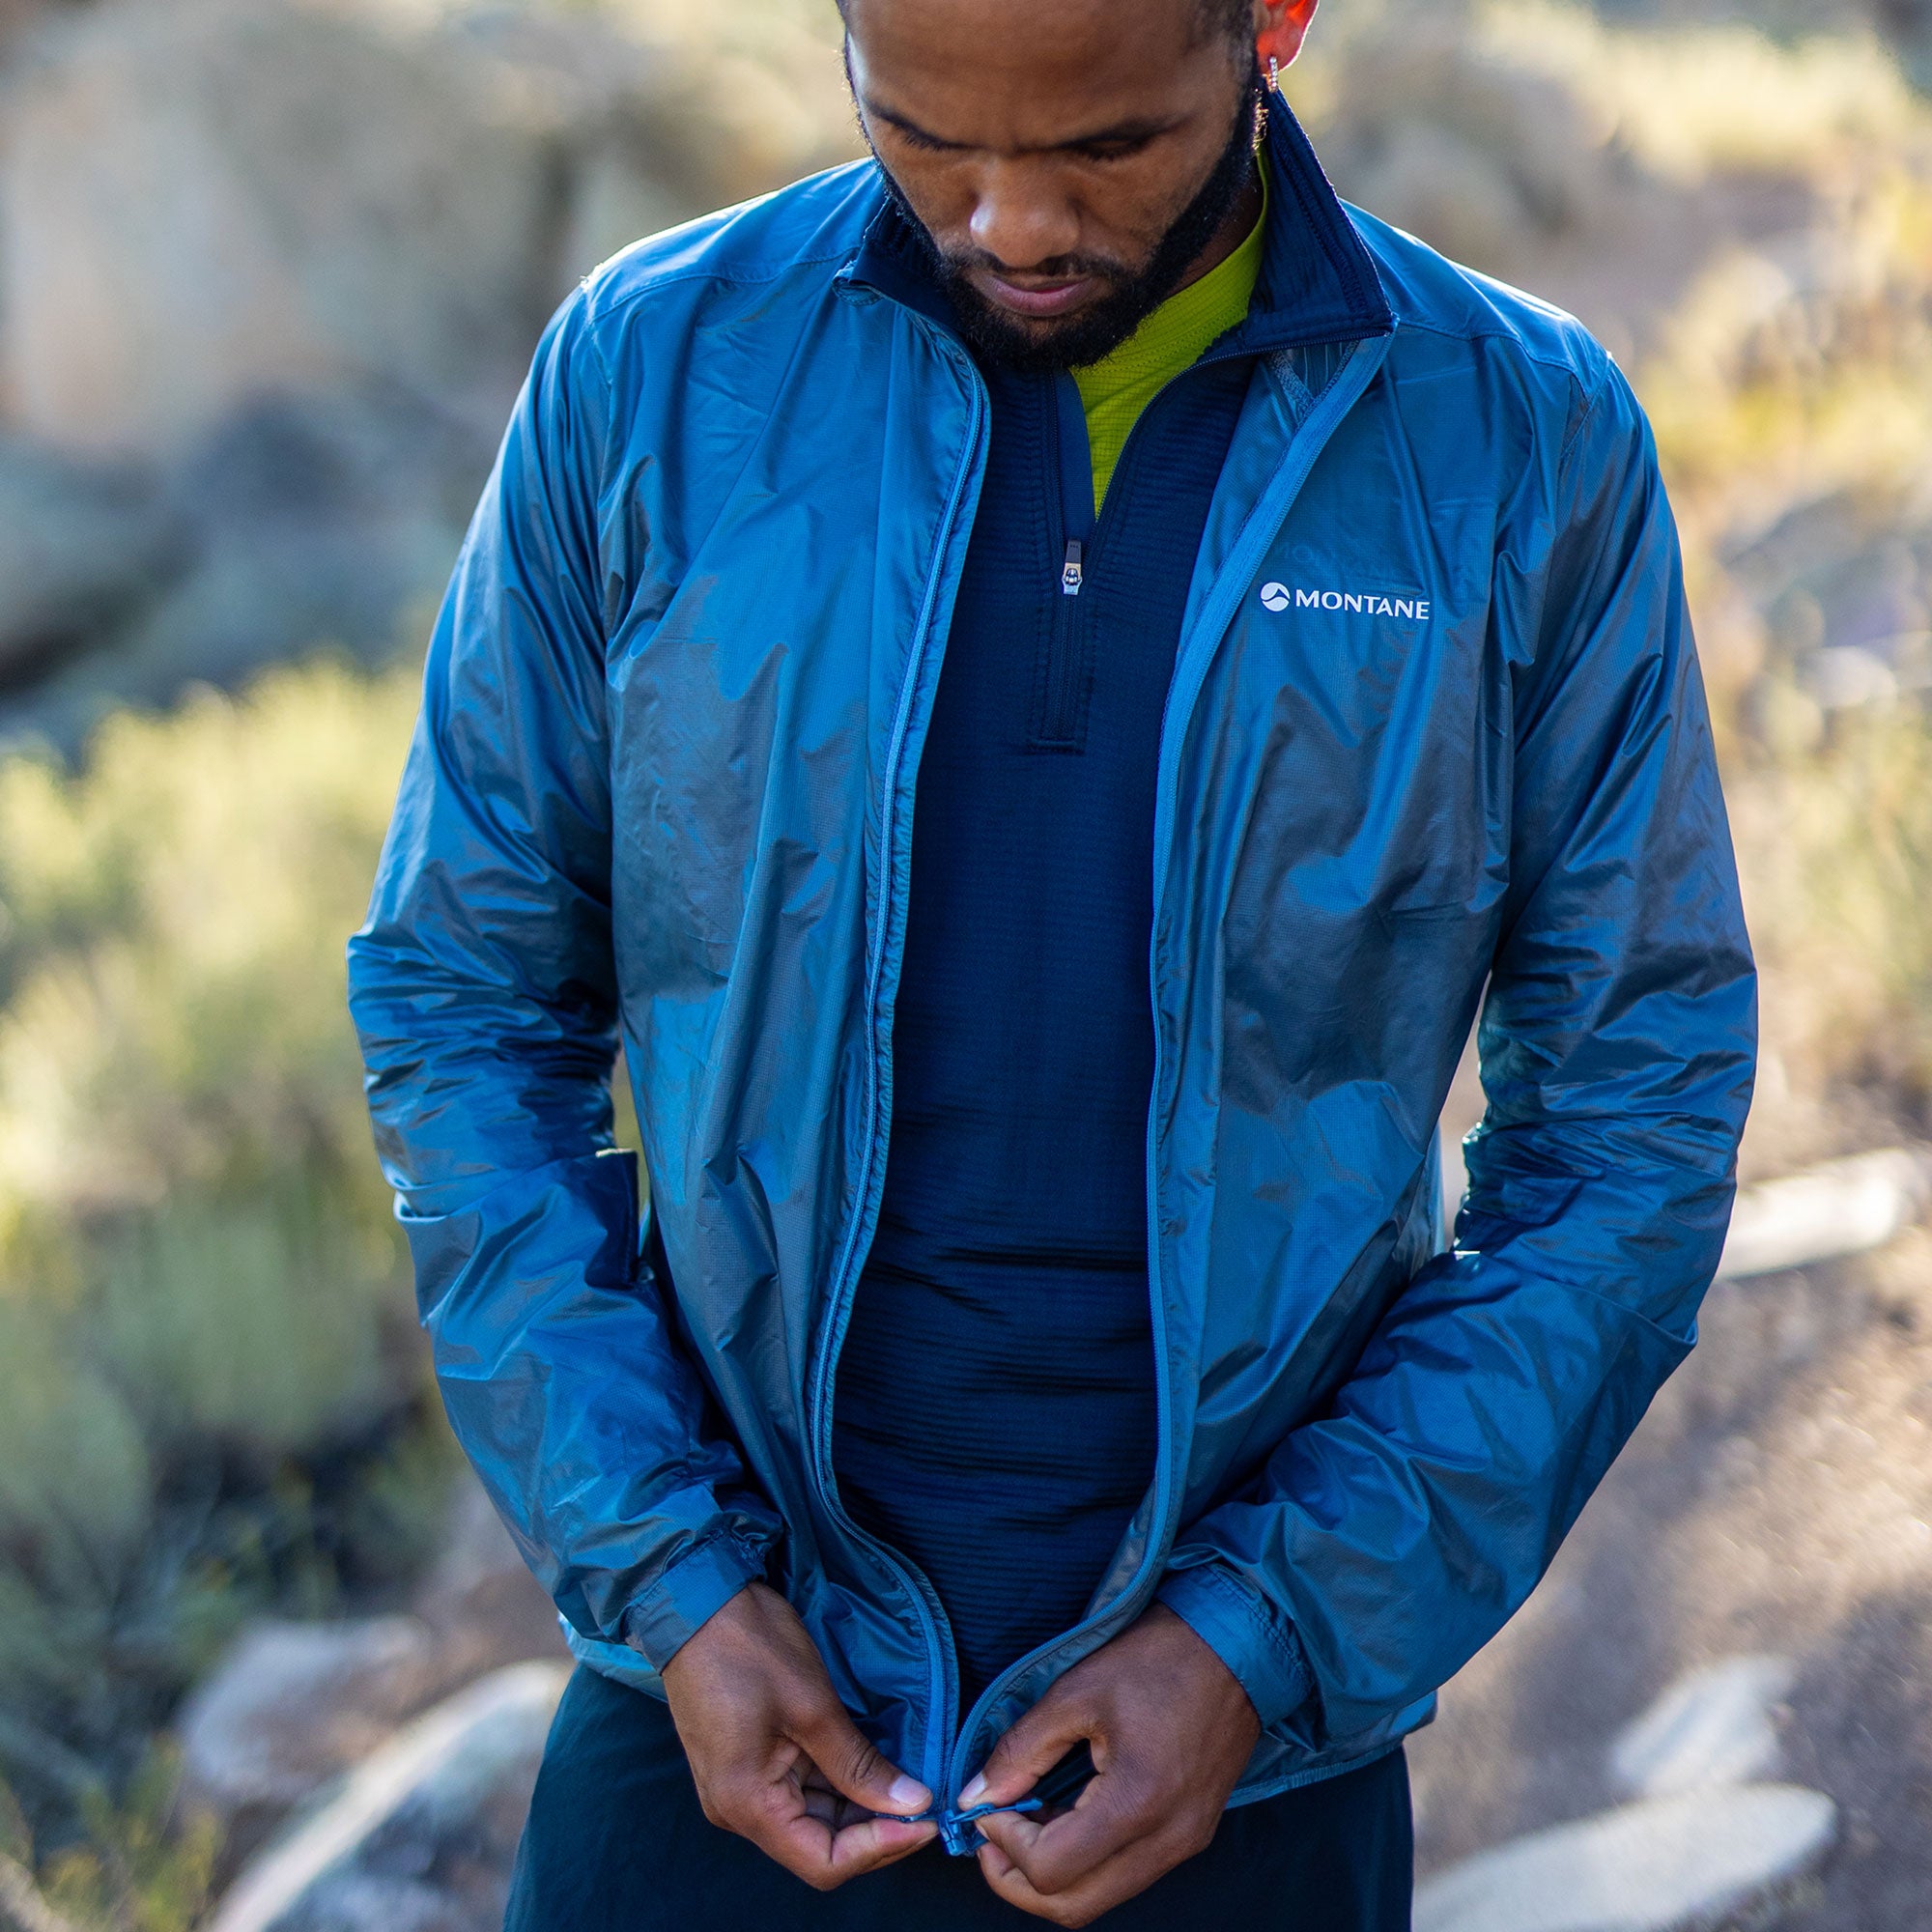 Mens Windproof Jackets | Lightweight, breathable & warm – Montane - US